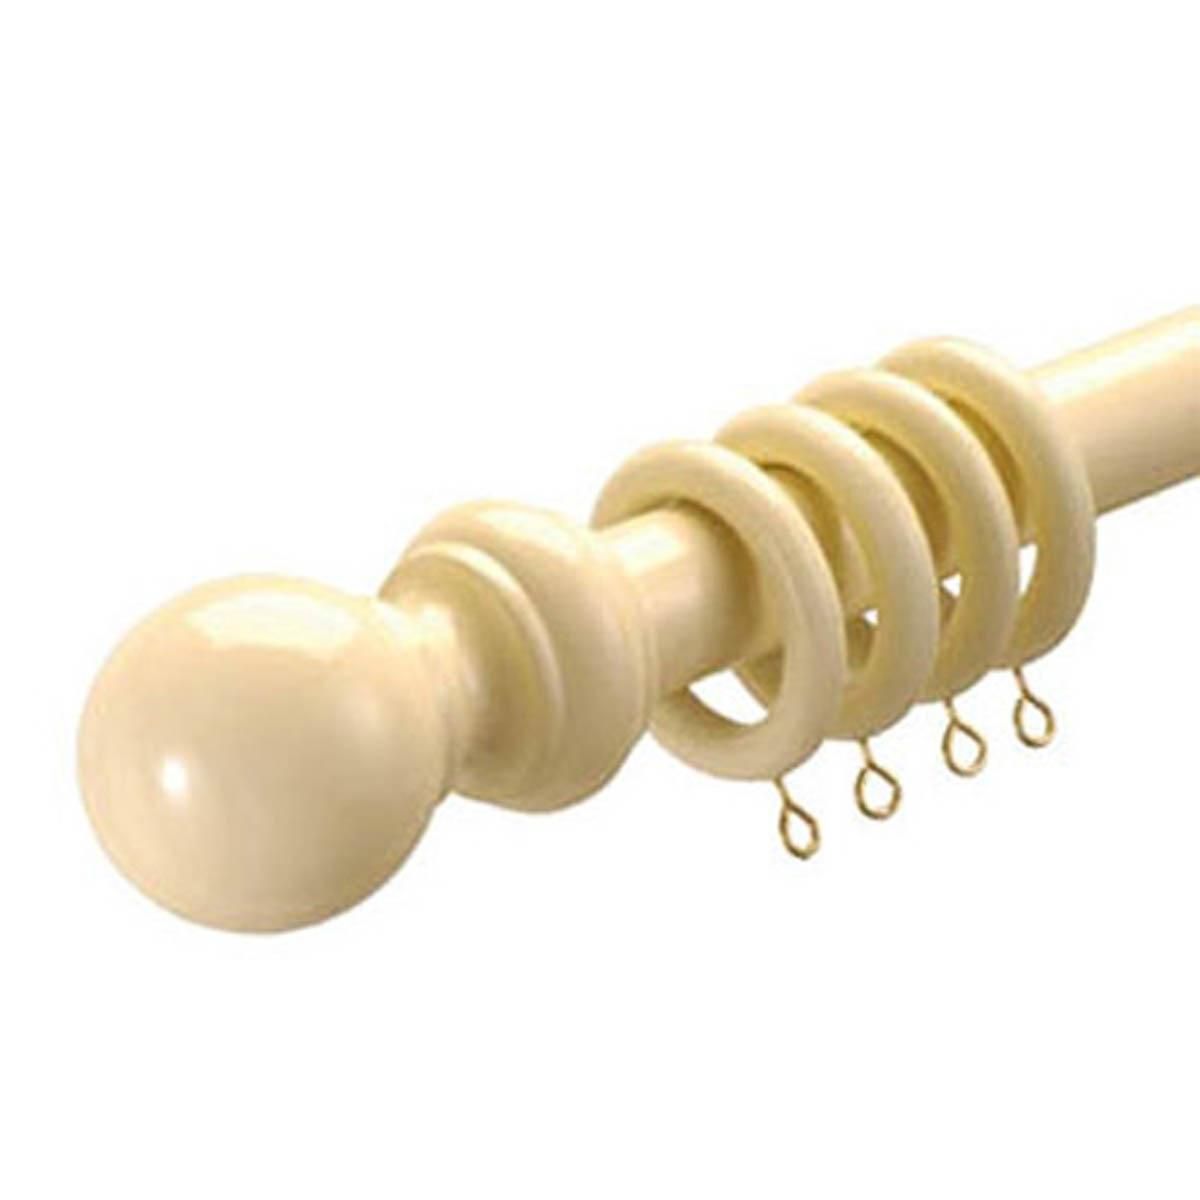 Cream 28mm County Wooden Curtain Pole Free Uk Delivery Terrys With Wooden Curtain Poles (View 13 of 25)